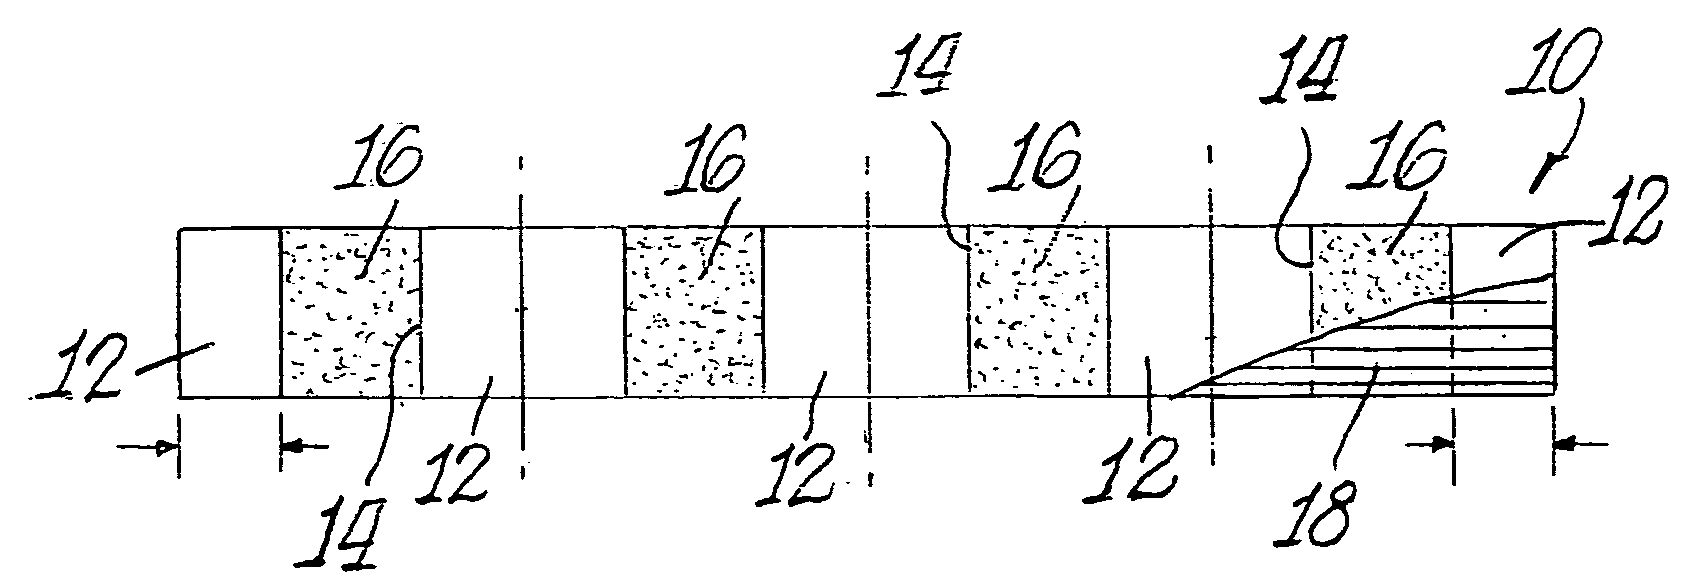 Method and apparatus for producing composite cigarette filters